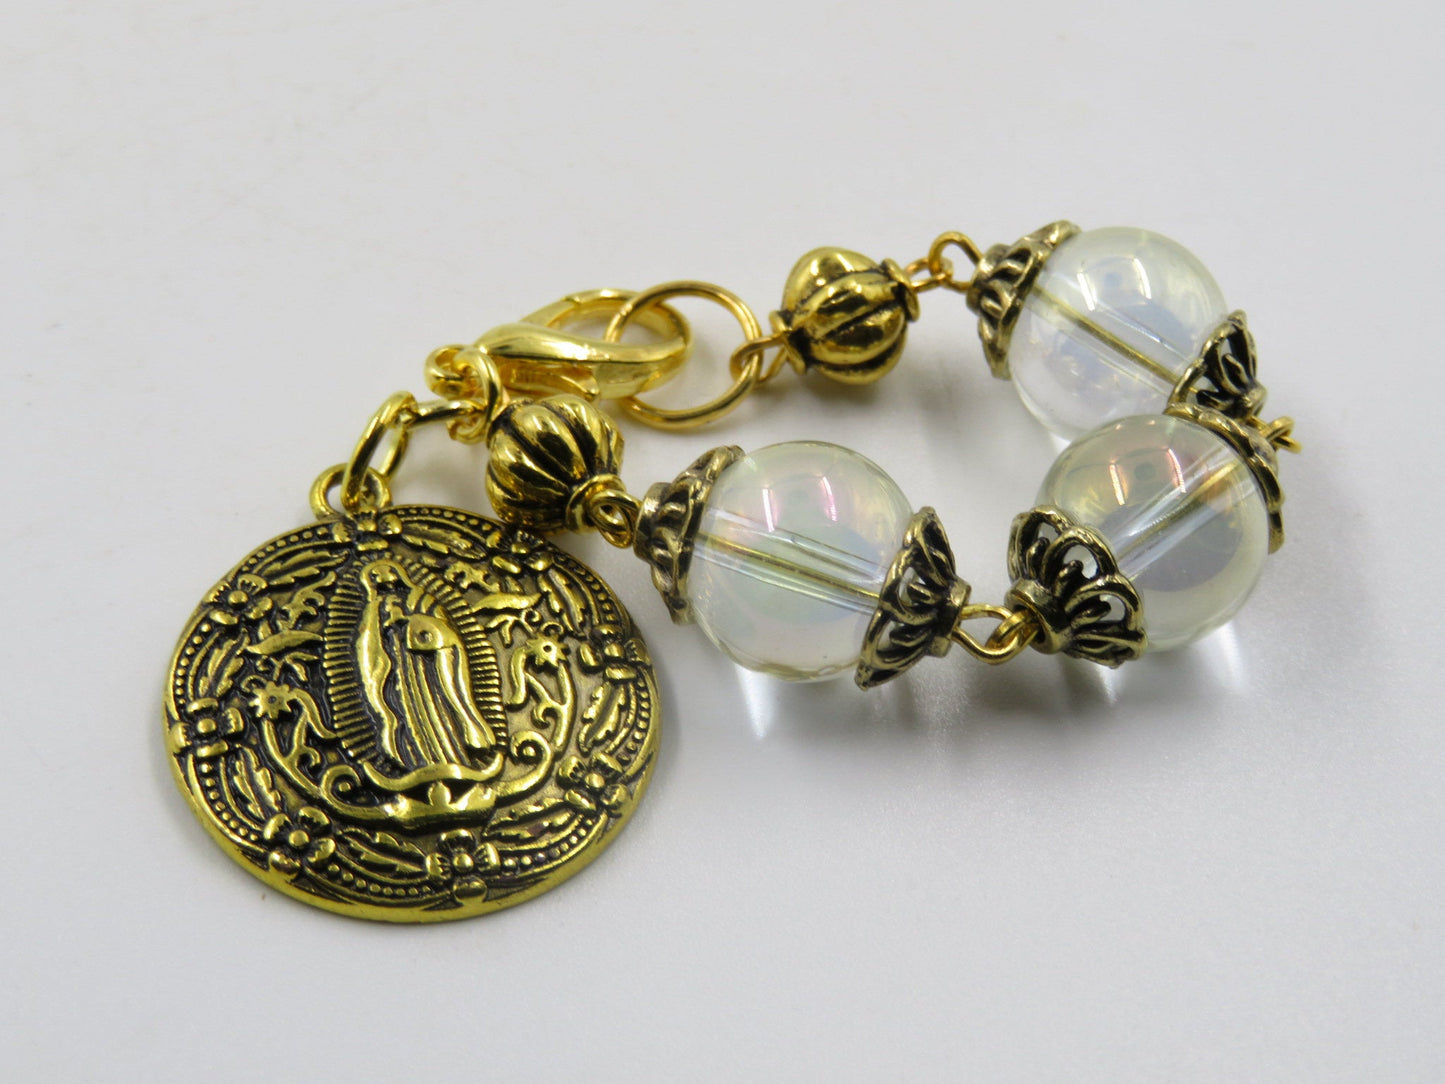 Our Lady of Guadalupe gold medal purse clip, Religious Key chain medal, Rosary beads, Three Hail Mary bead, prayer beads, Ave Maria beads.